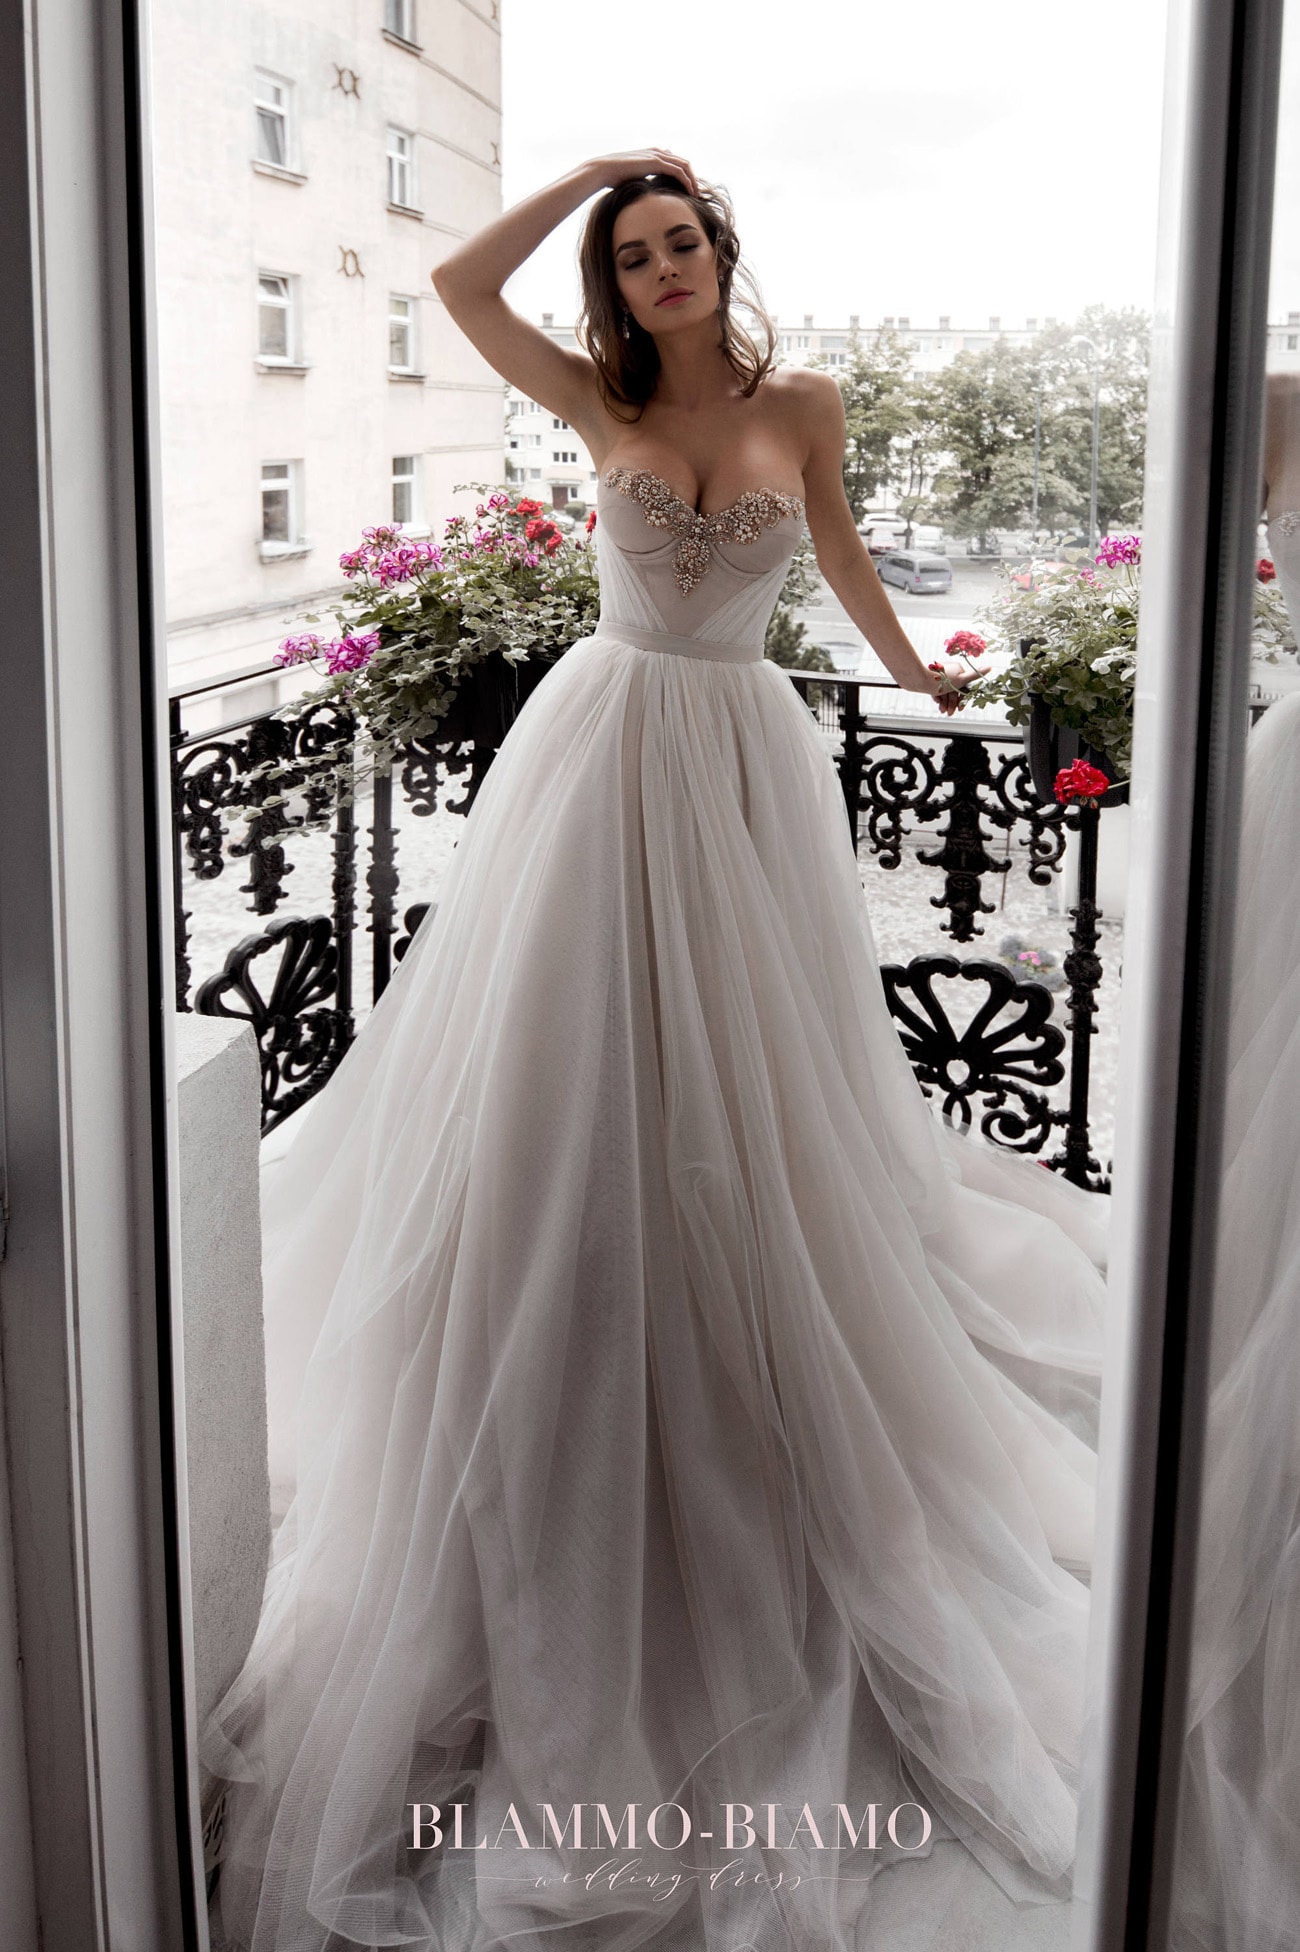  Hourglass Wedding Dress  The ultimate guide 